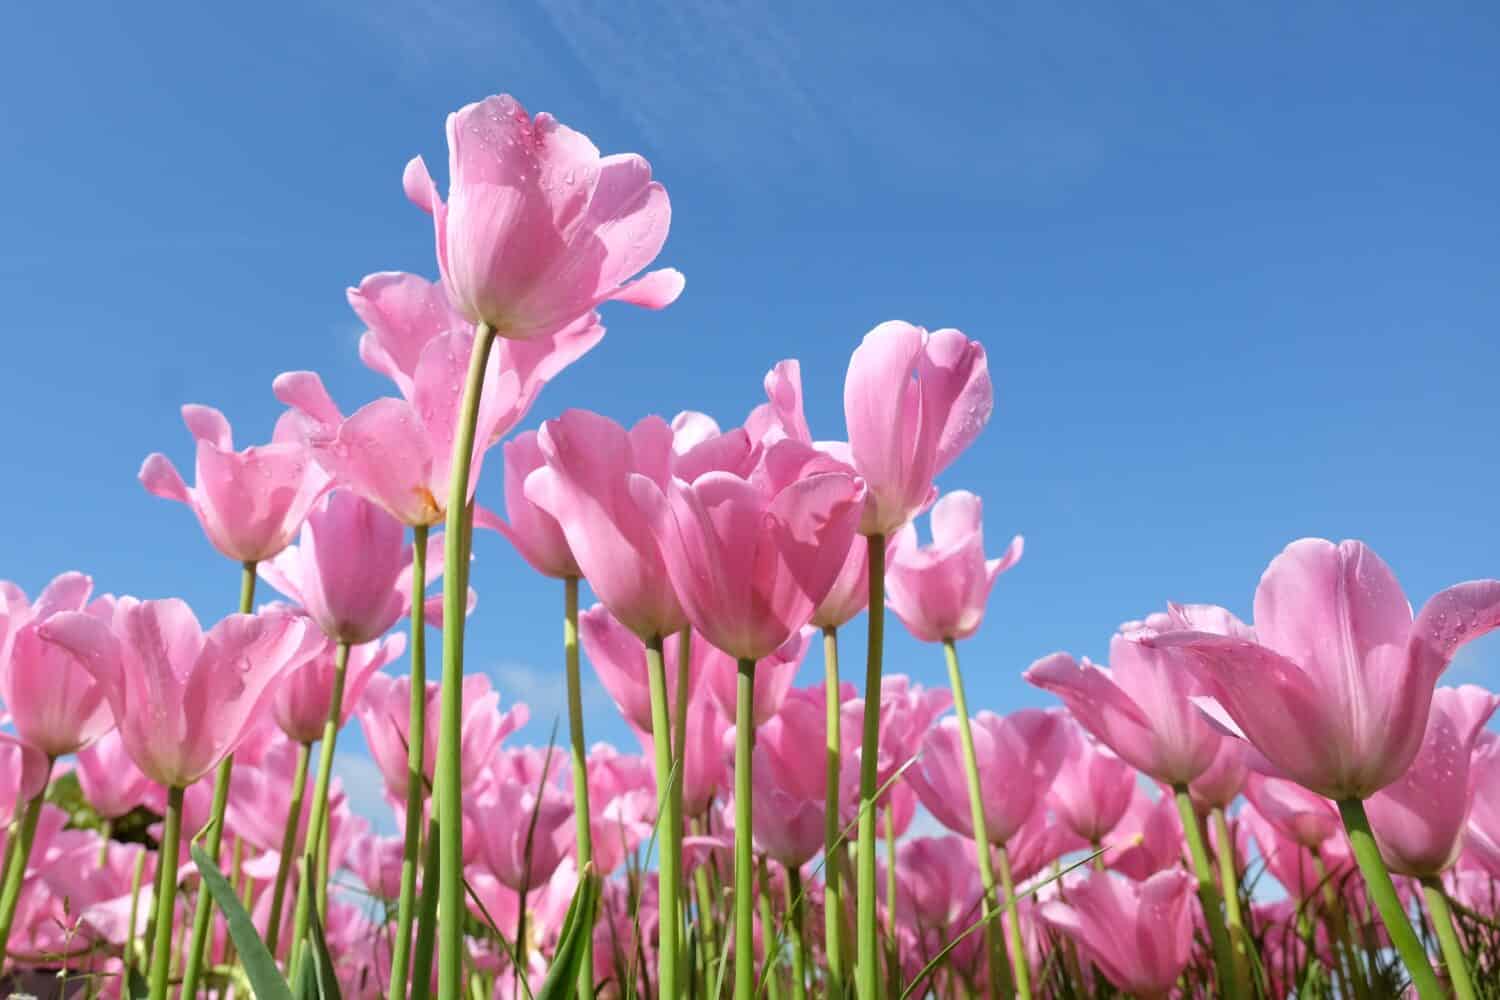 Pink Tulip Symbolism: Spreading a Spirit of Care and Optimism For Generations to Come